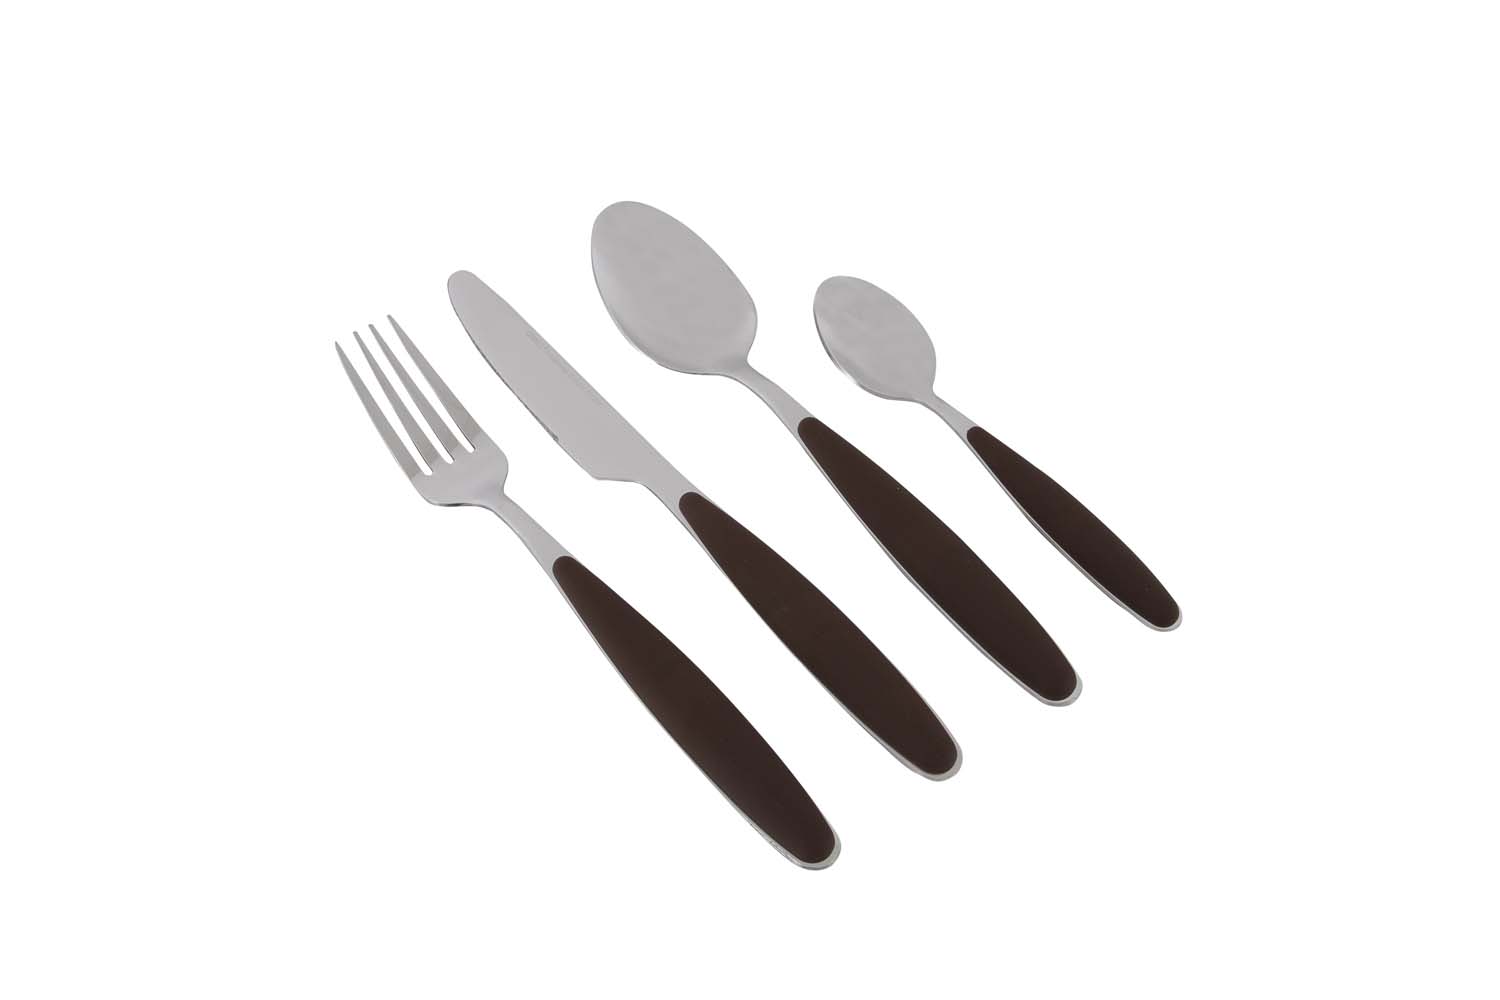 6919101 A stylish cutlery set made of stainless steel. The cutlery has a trendy brown color. With a soft touch handle so the cutlery is comfortable in the hand. The set consists of 4x a knife, fork, spoon and teaspoon and is also dishwasher safe. Matching the melamine dinnerware from Gimex. Dimensions: Fork 21.5 cm, knife 23 cm, spoon 21 cm, teaspoon 15 cm.